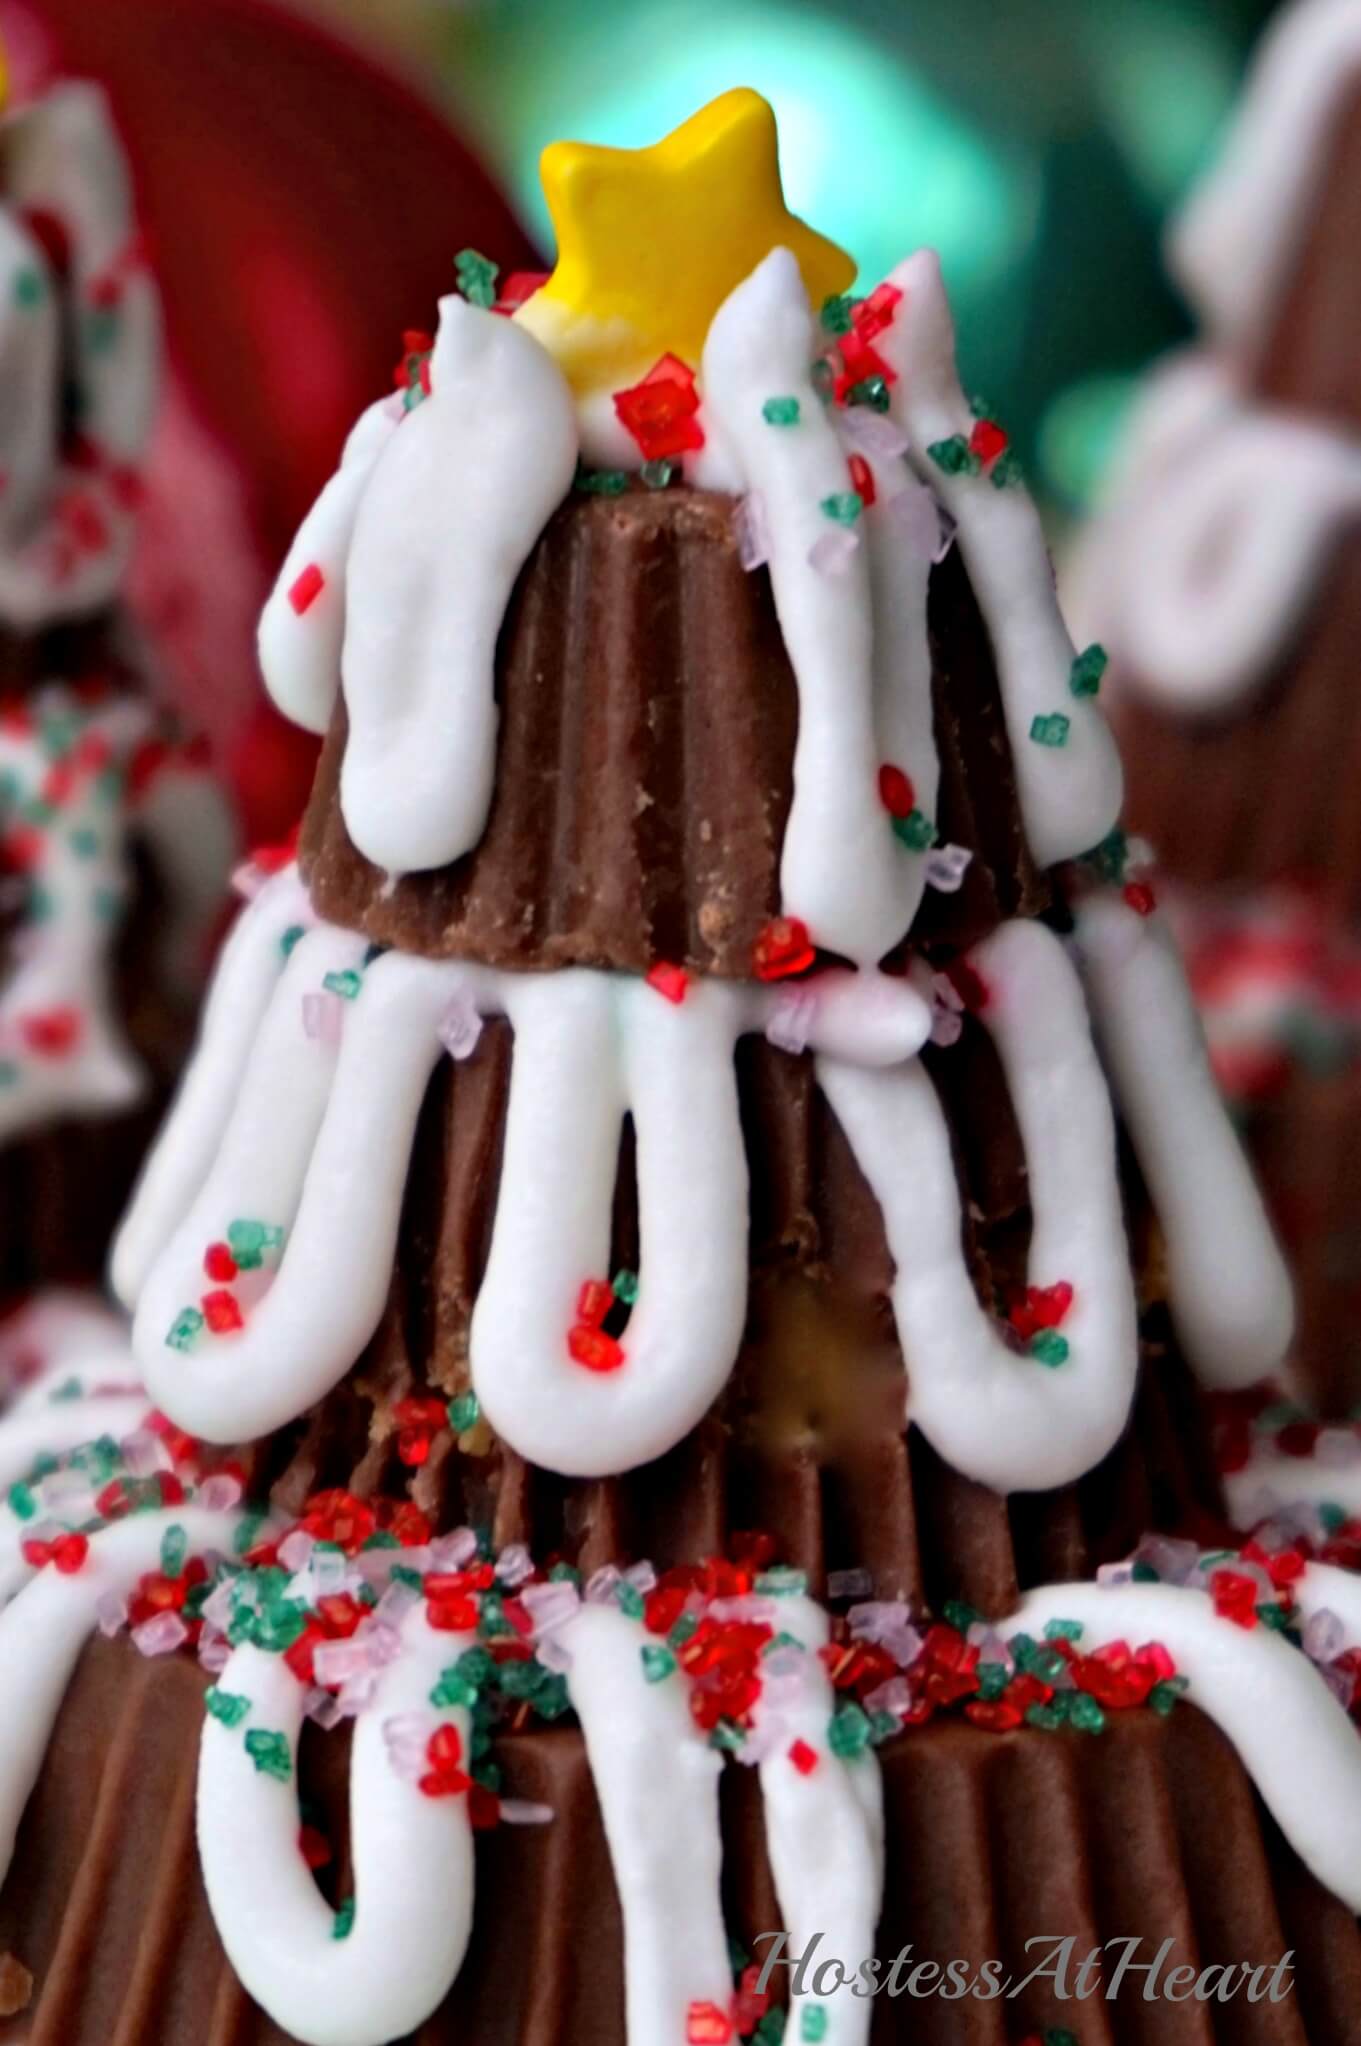 A Christmas tree made from Reeses Peanut Butter cups decorated with frosting and sprinkles with Ornaments in the background.